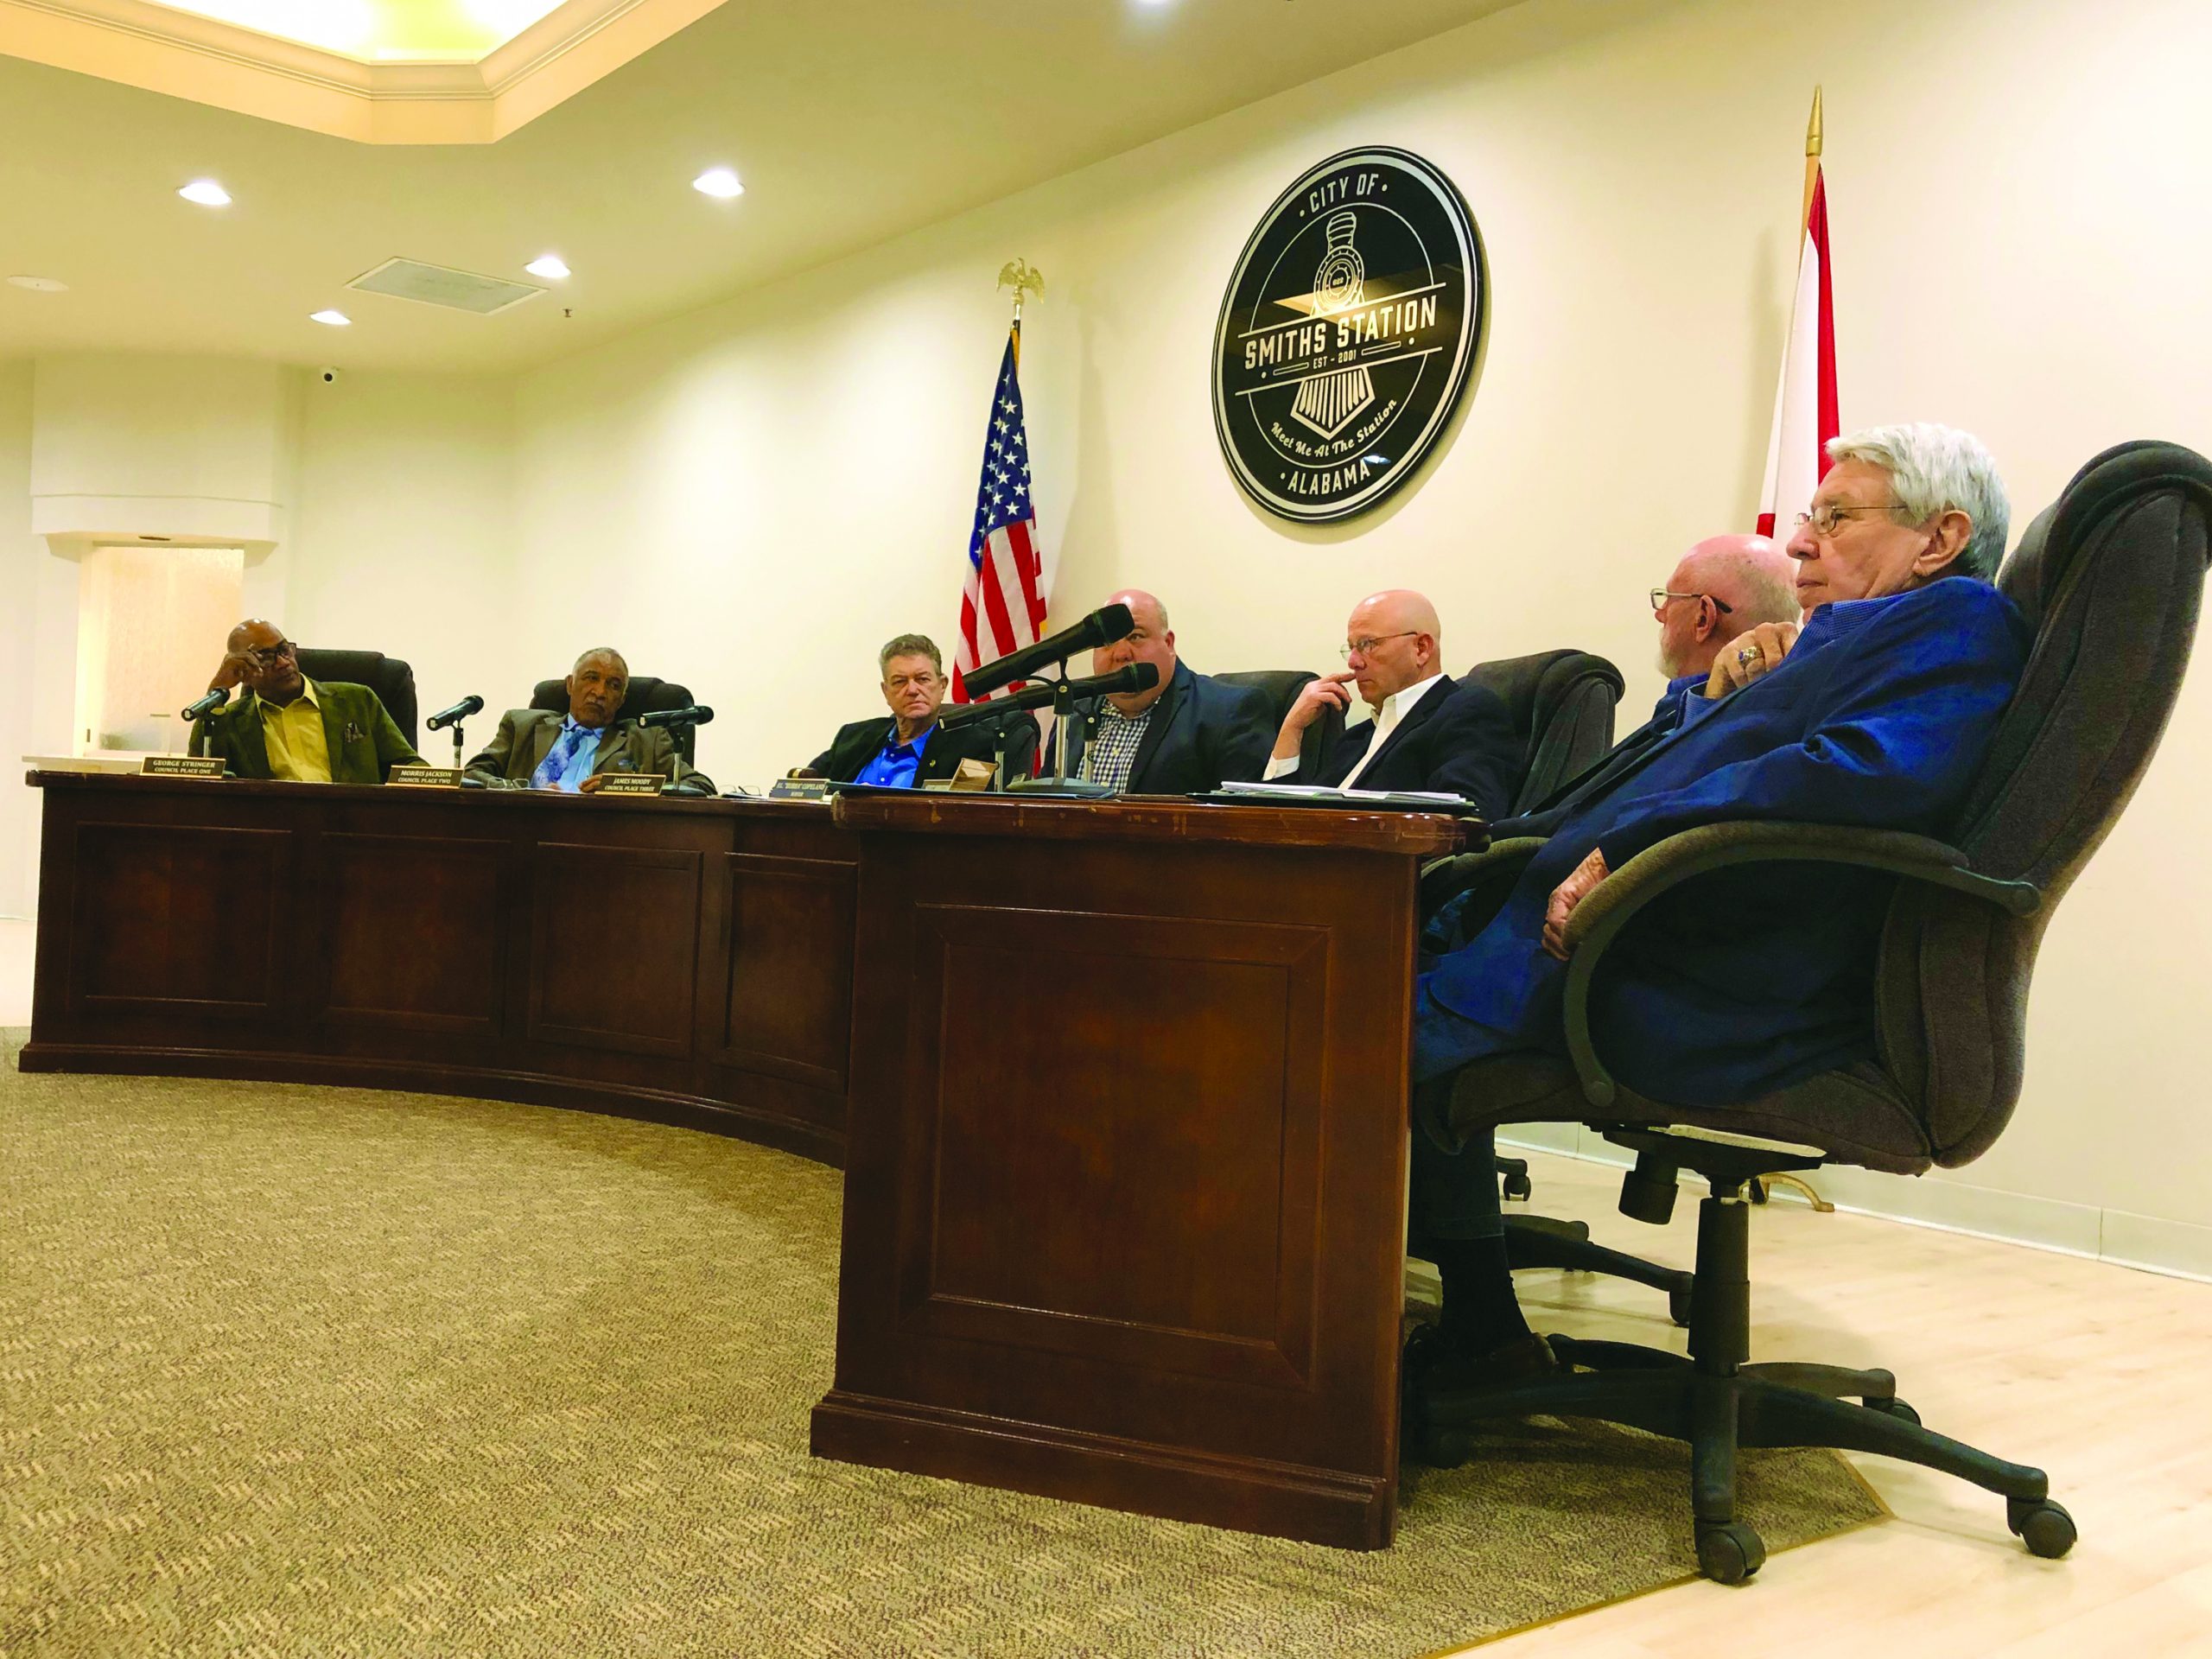 Smiths Station City Council hear, approve clean opinion on city’s 2019 audit report